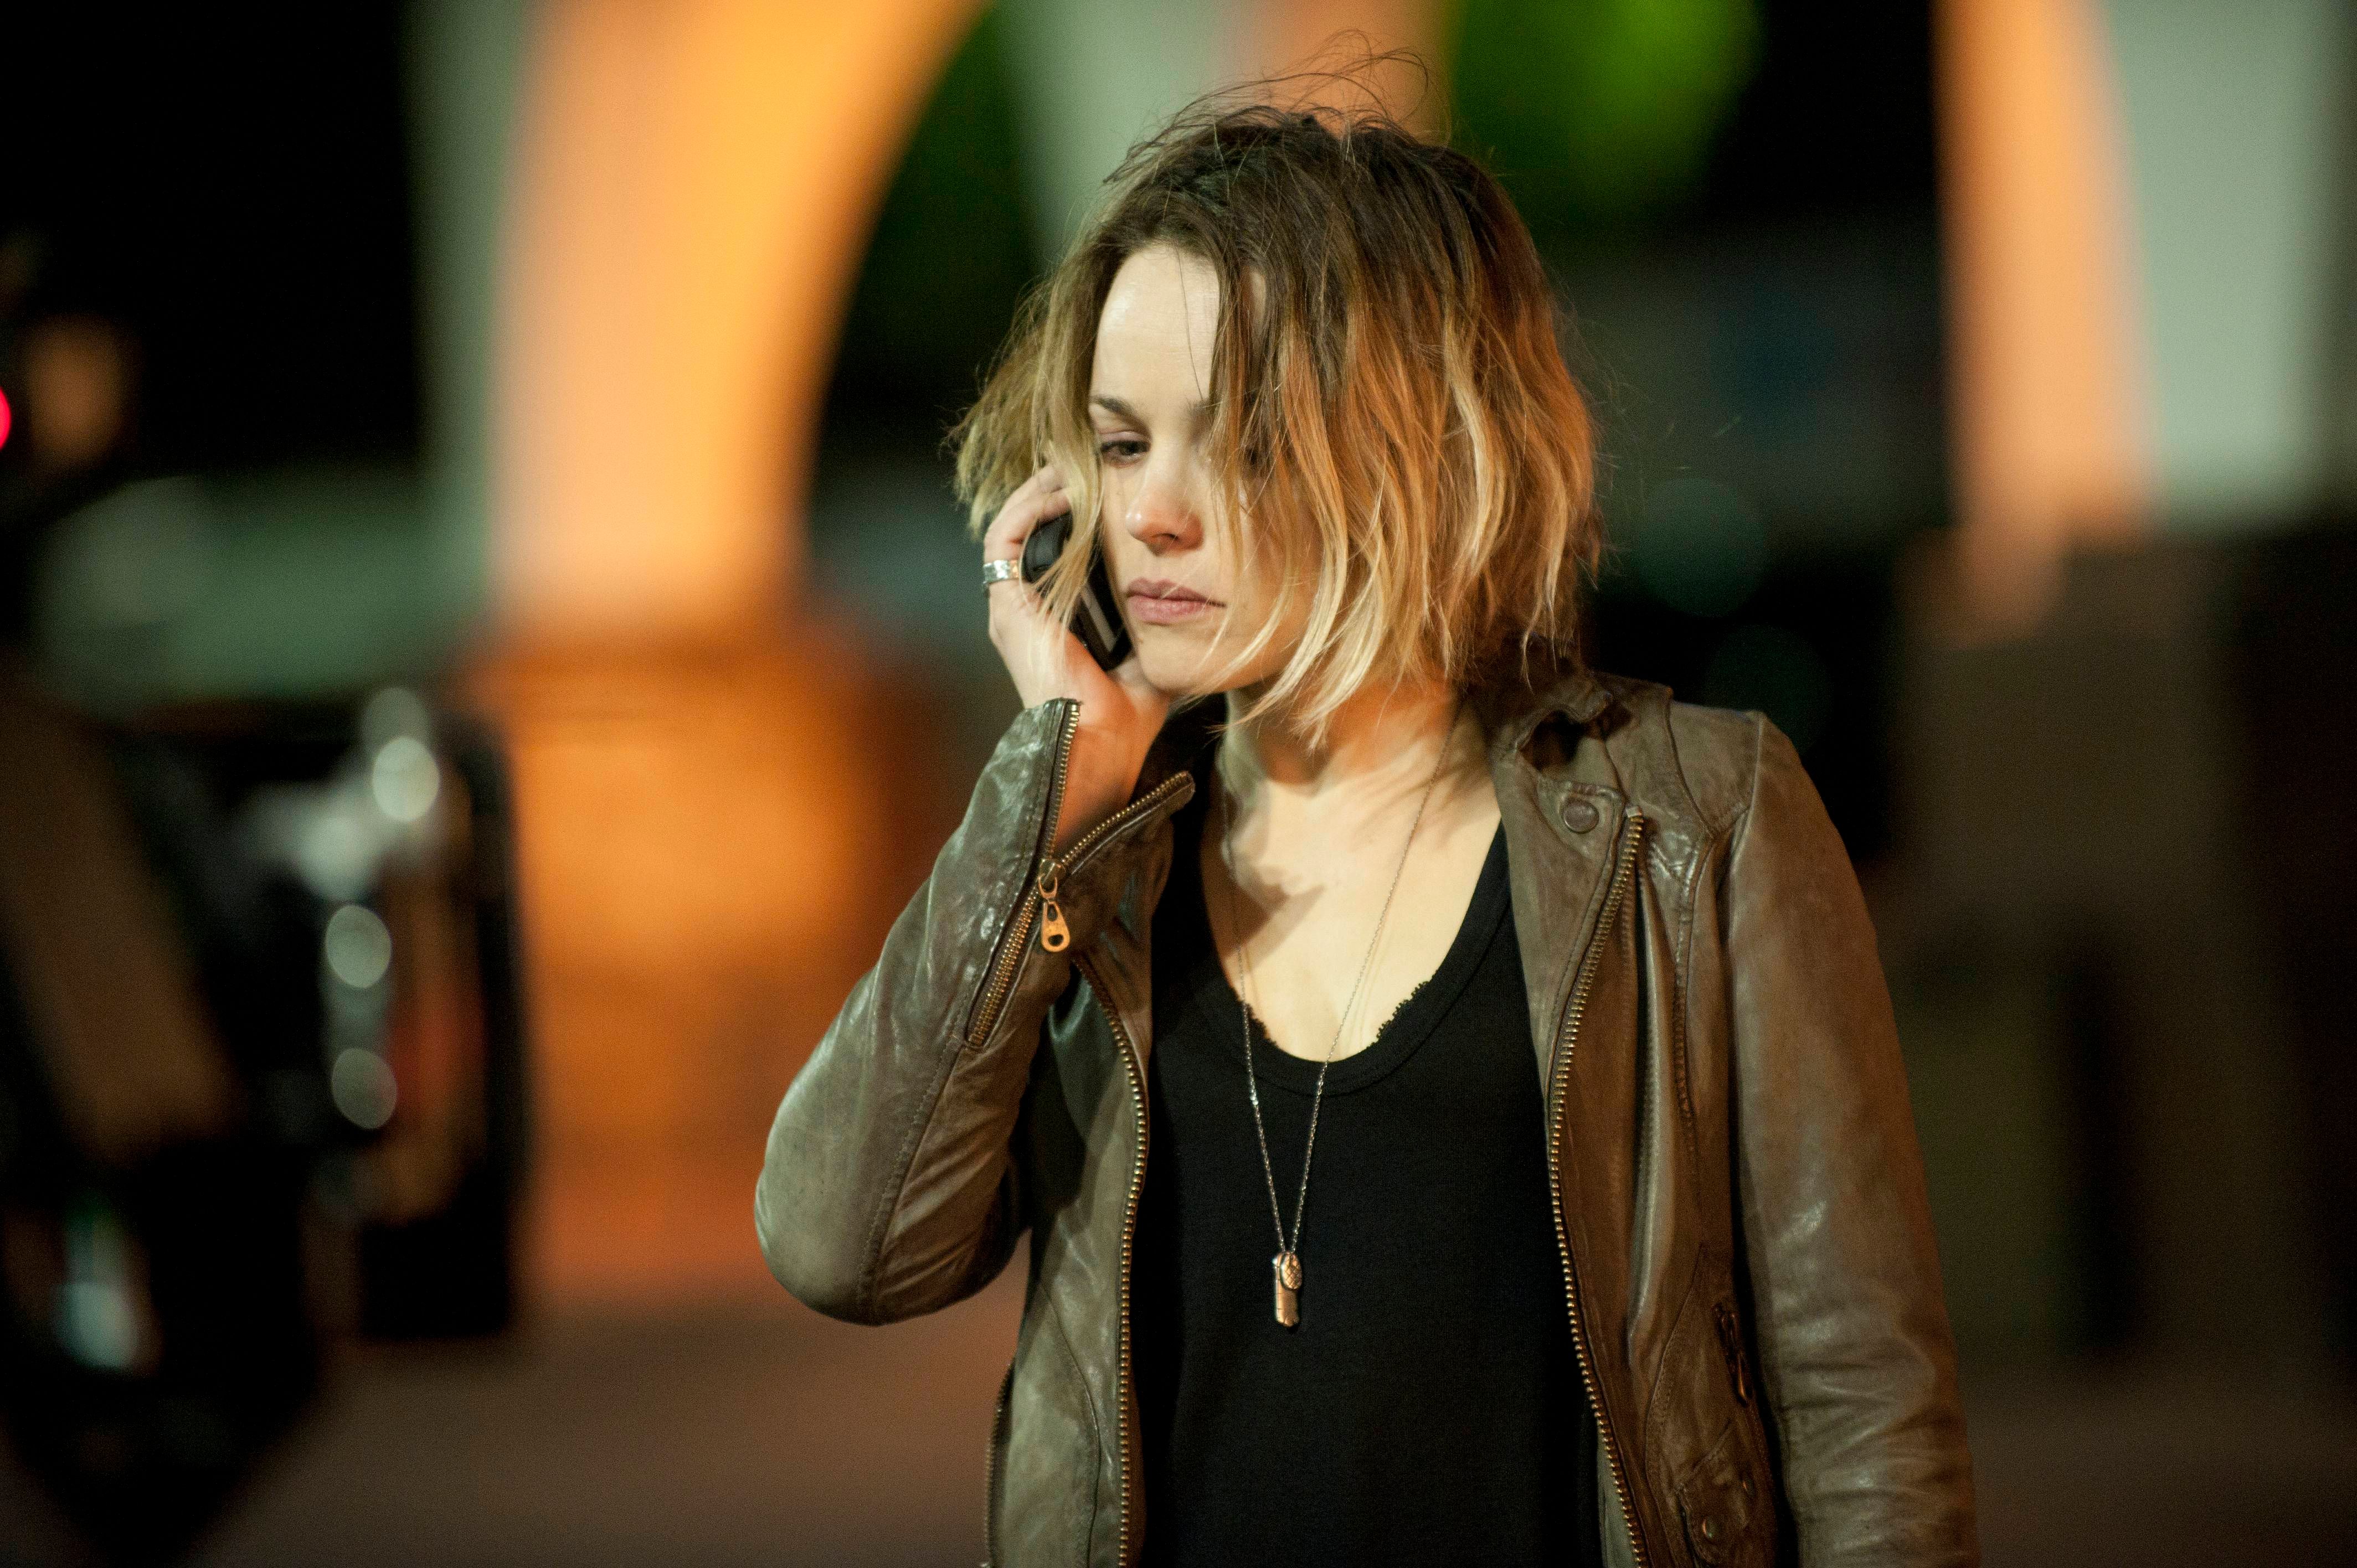 True Detective Season 2 Trailer Introduces the New Characters | Collider